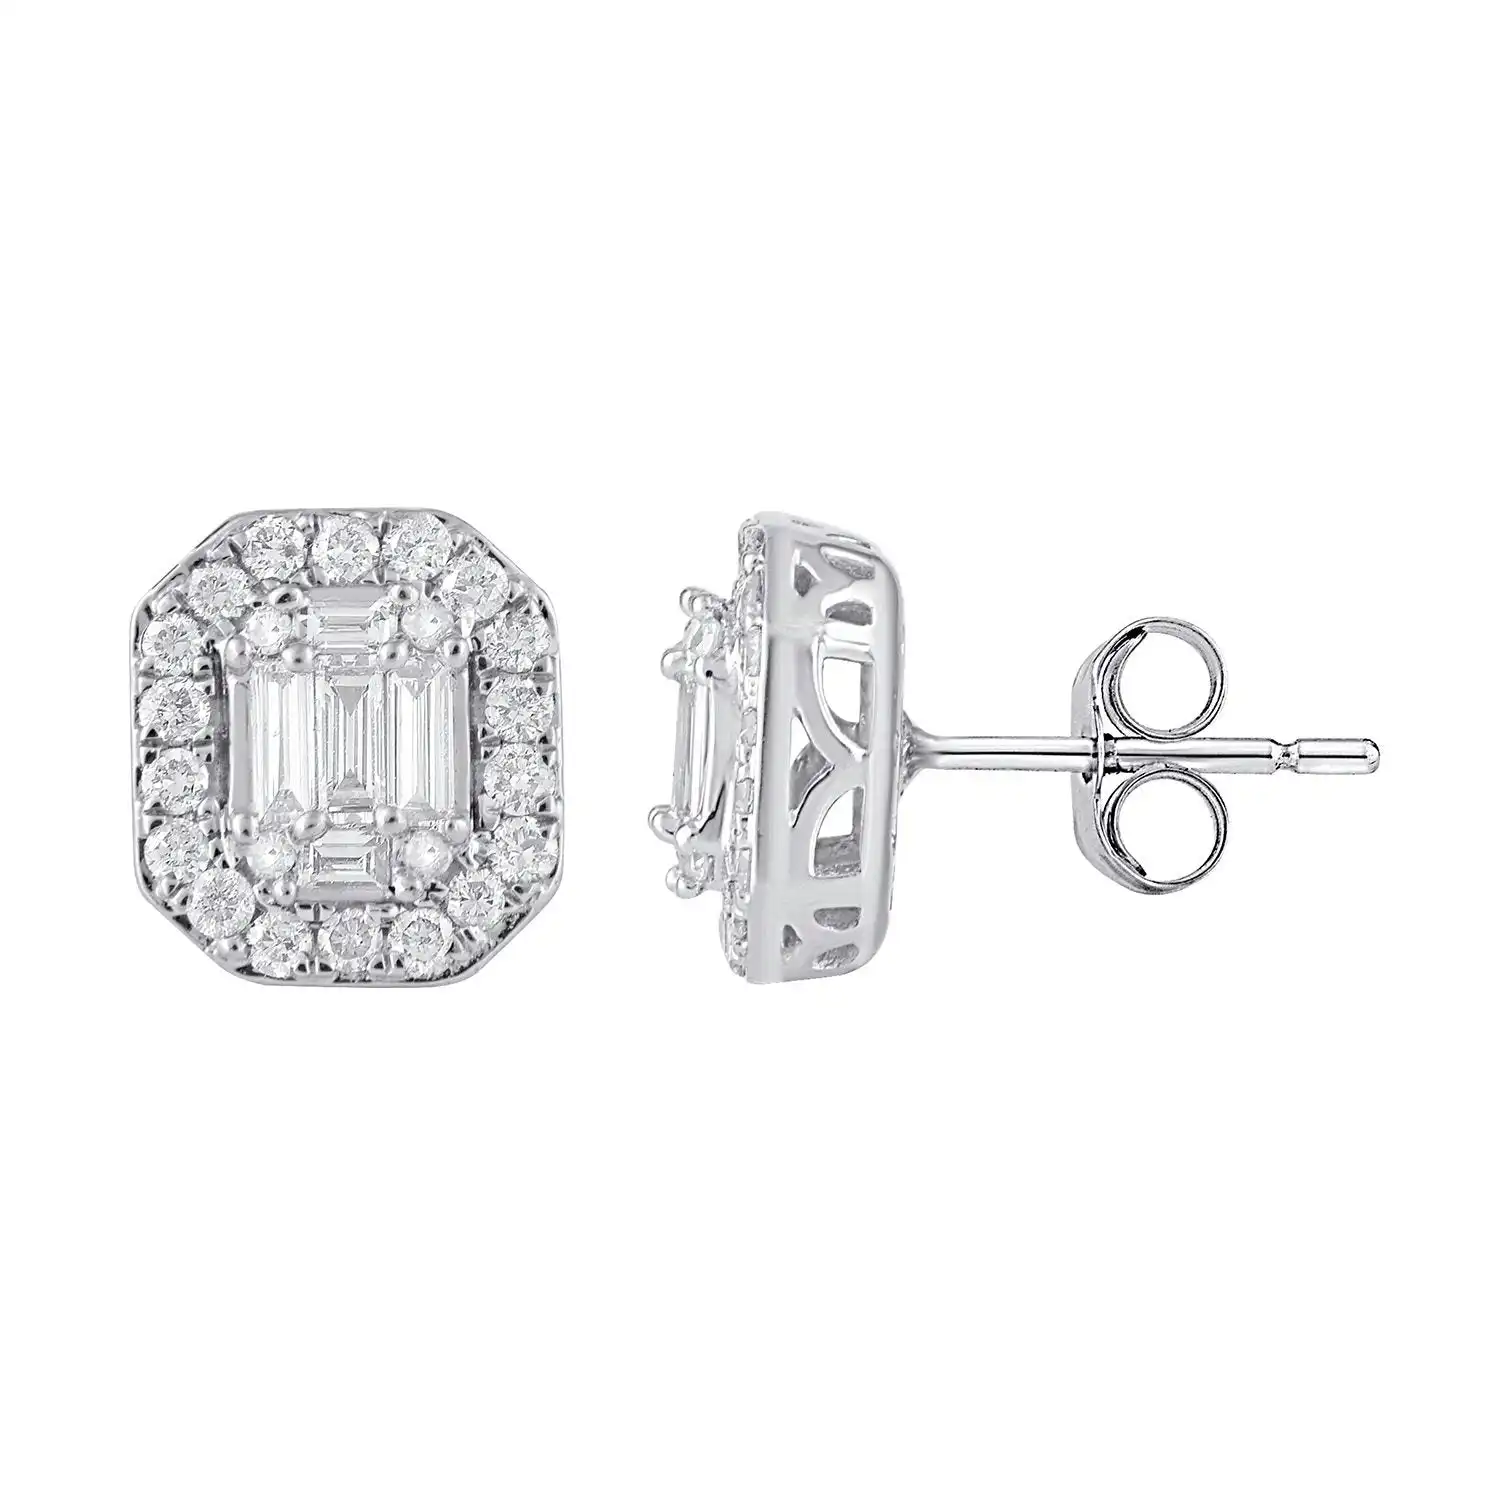 Brilliant Claw Surround Stud Earrings with 1/2ct of Diamonds in 9ct White Gold